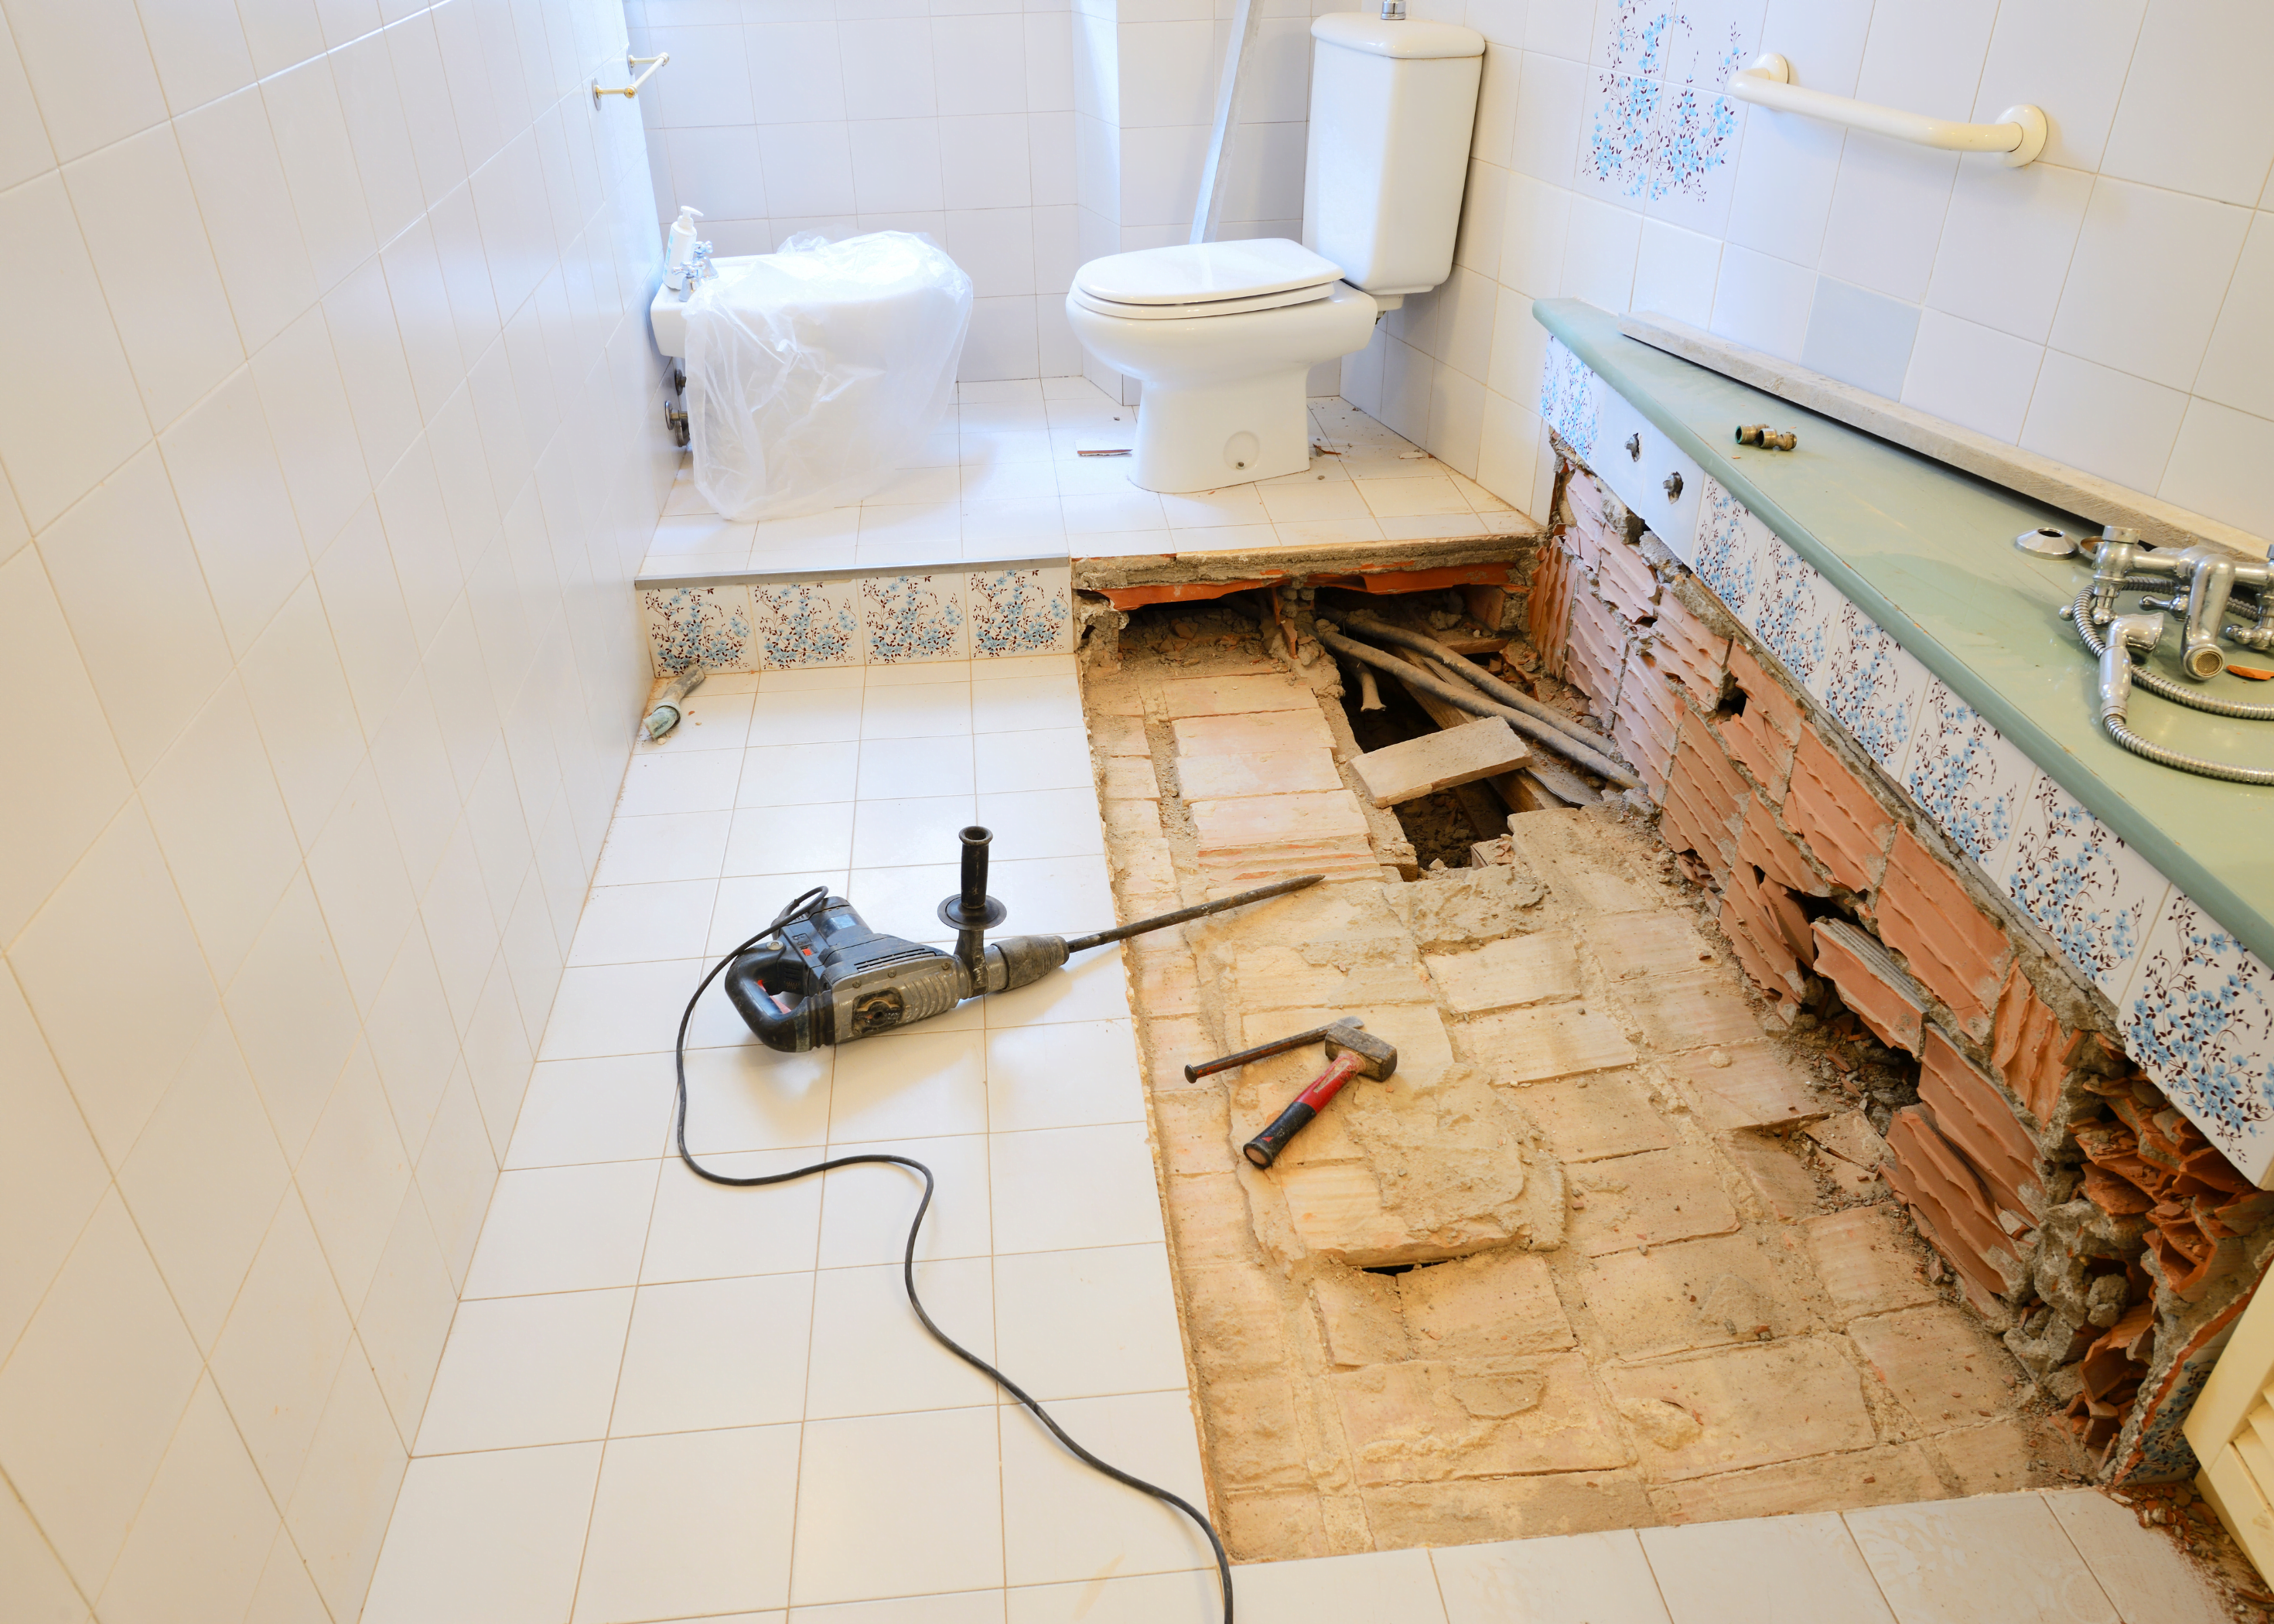 Transform your bathroom with renovation services in Ocala from Ocala Handyman Co.